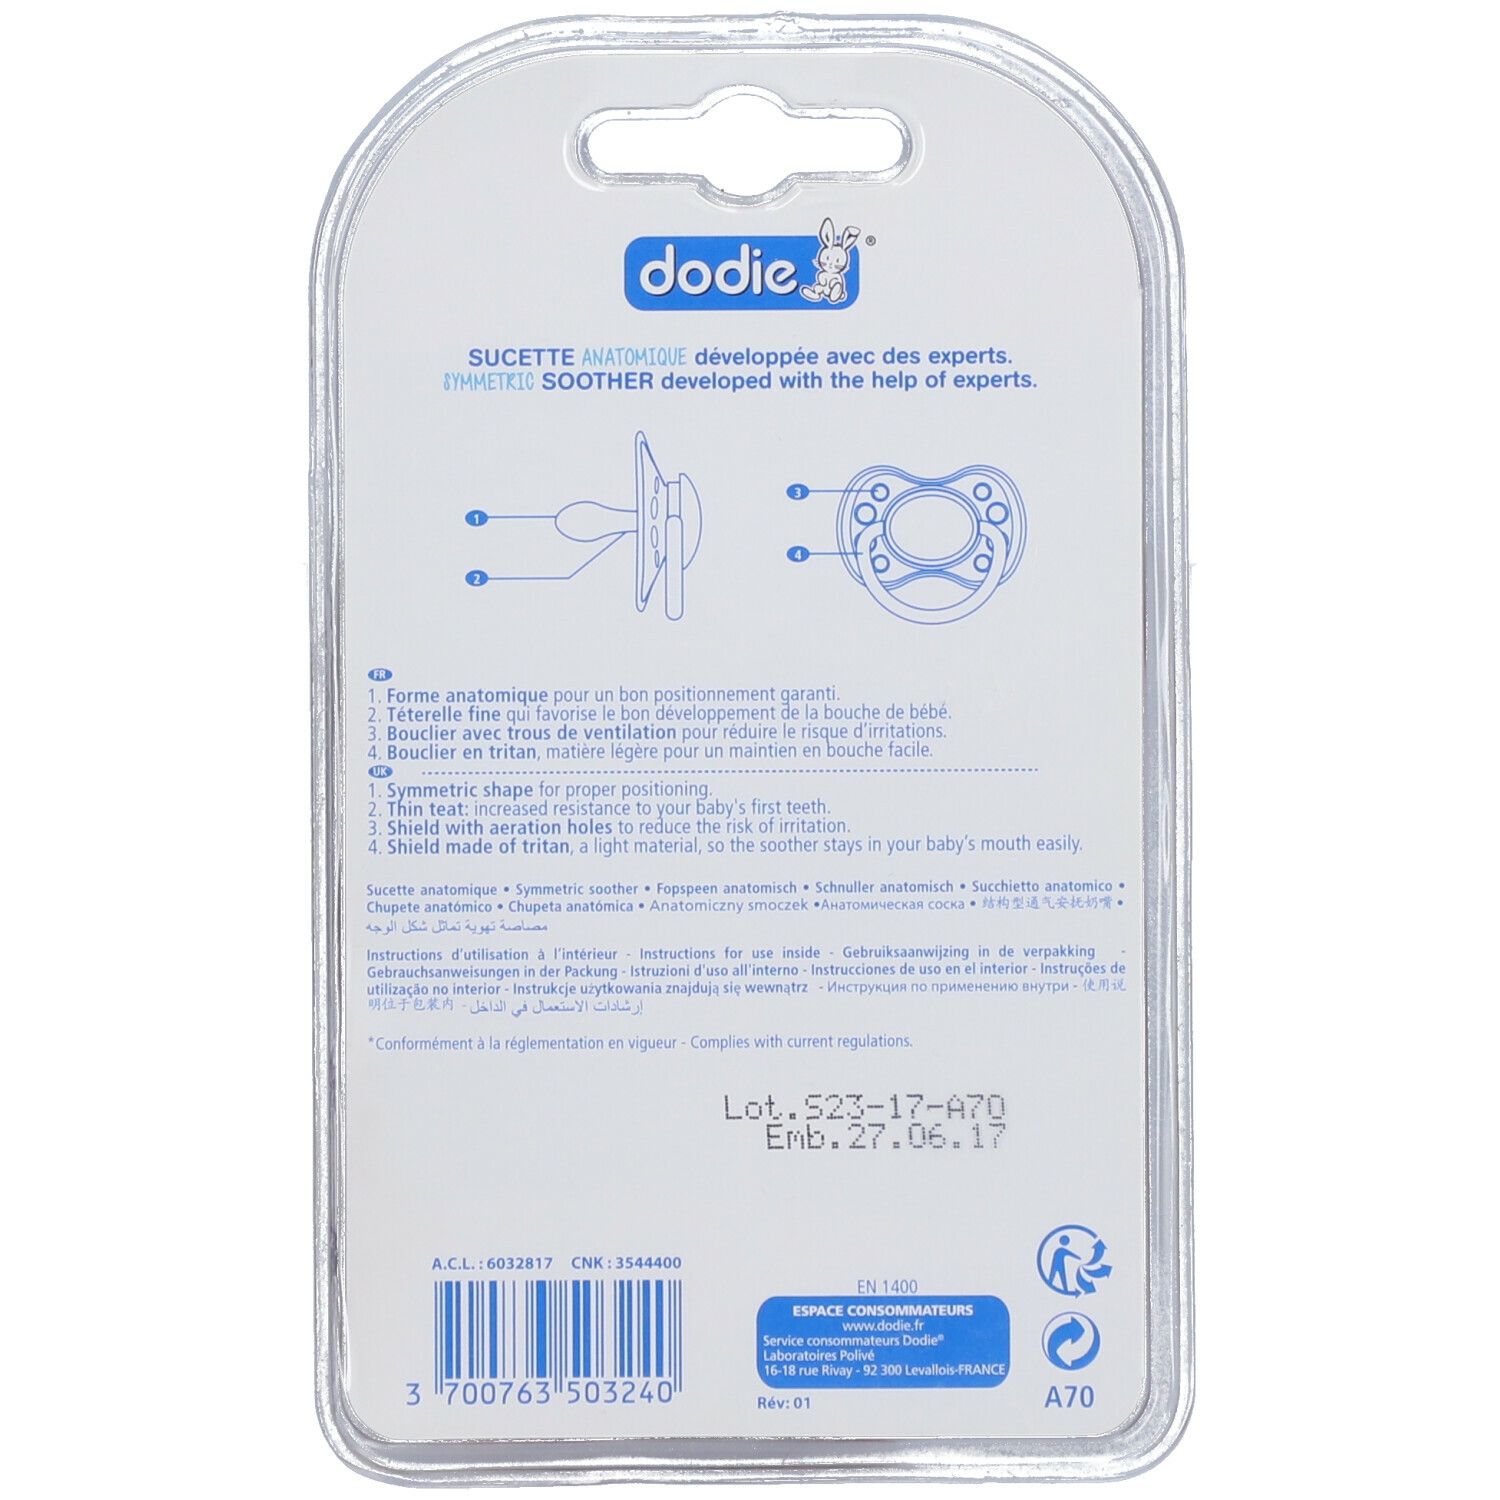 dodie® Duo sucettes +18 mois Motiv "Duo girly"